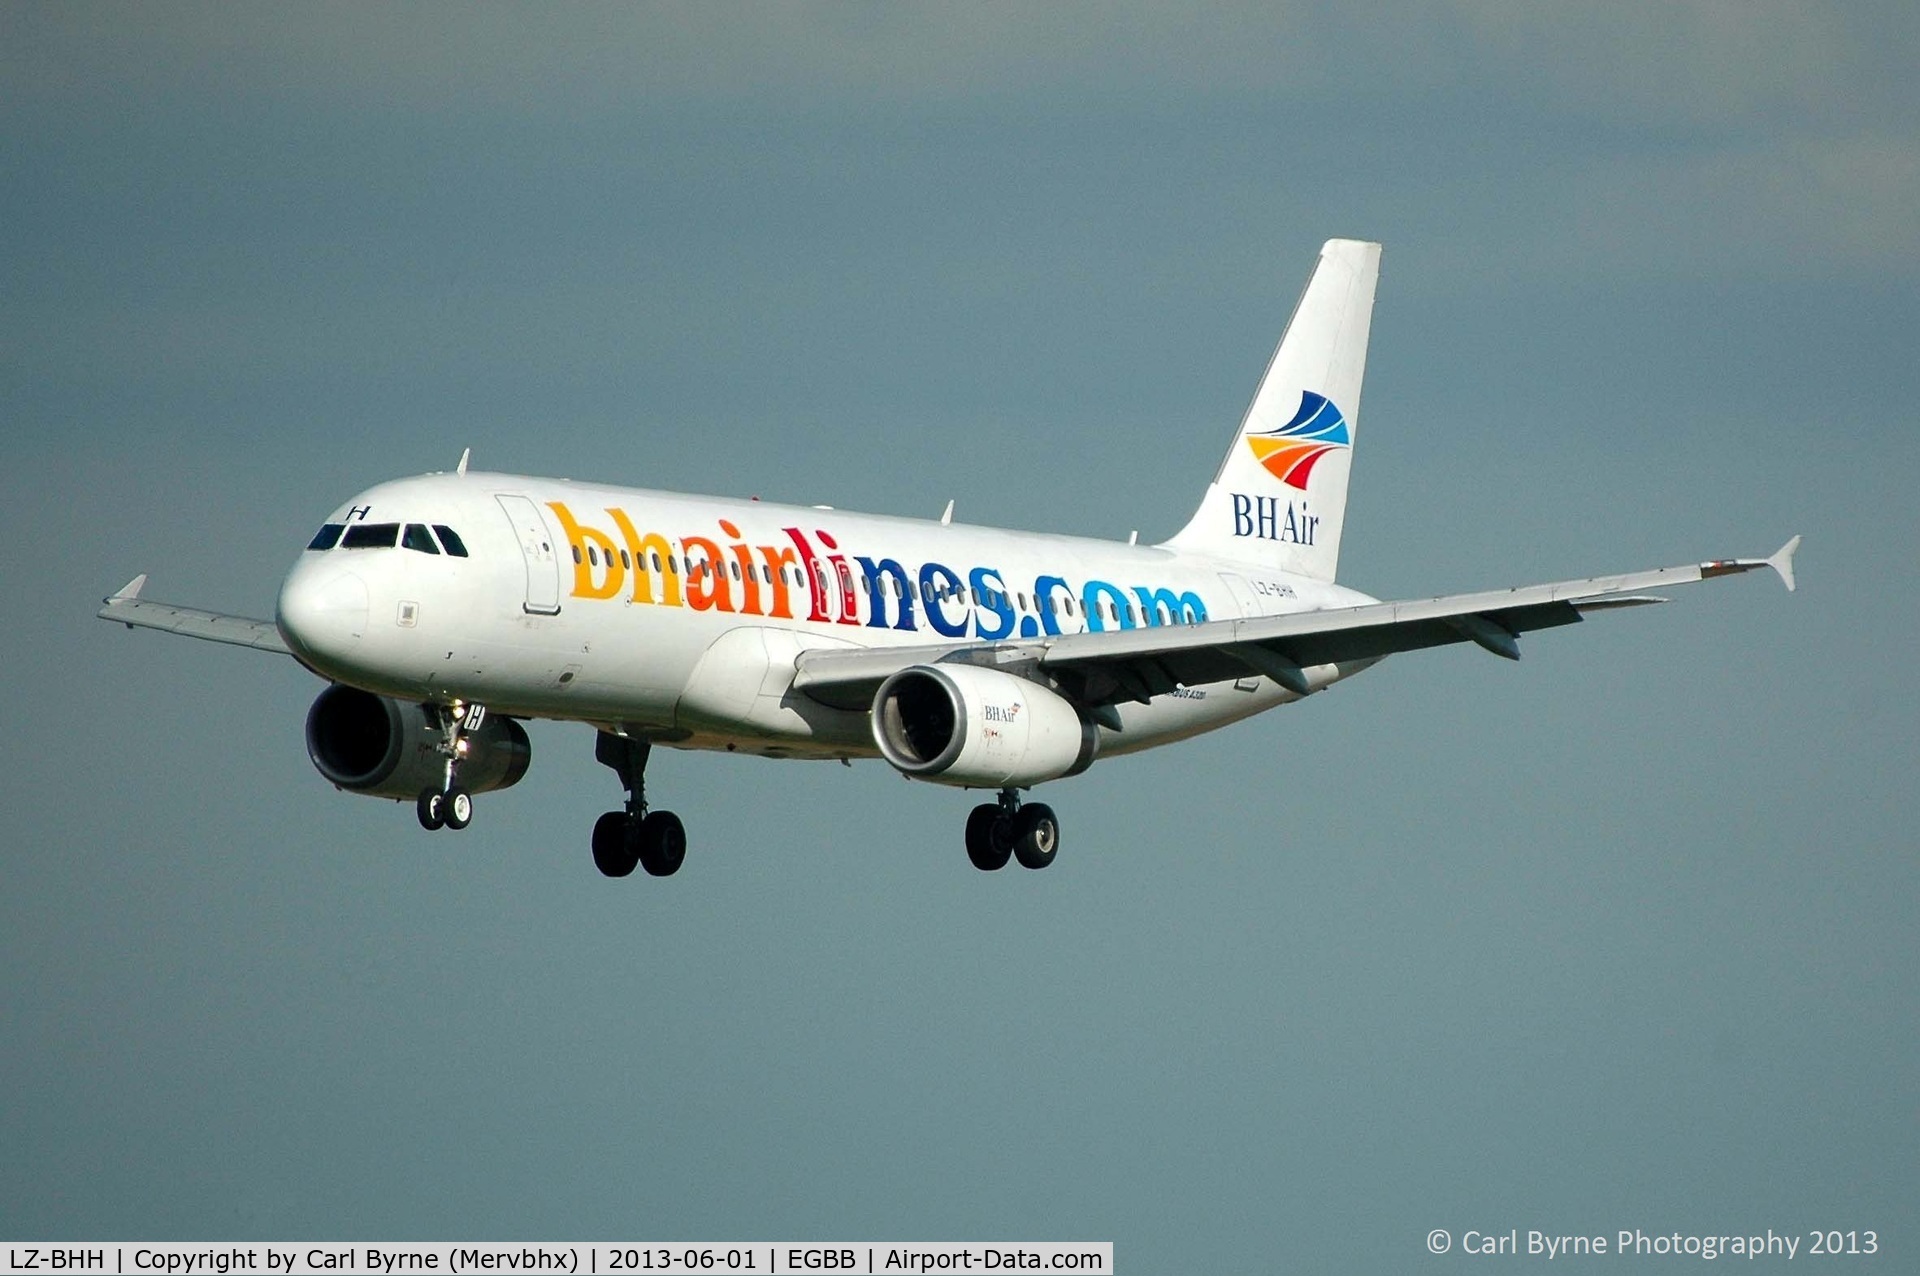 LZ-BHH, 2006 Airbus A320-232 C/N 2863, Taken from the MSCP.